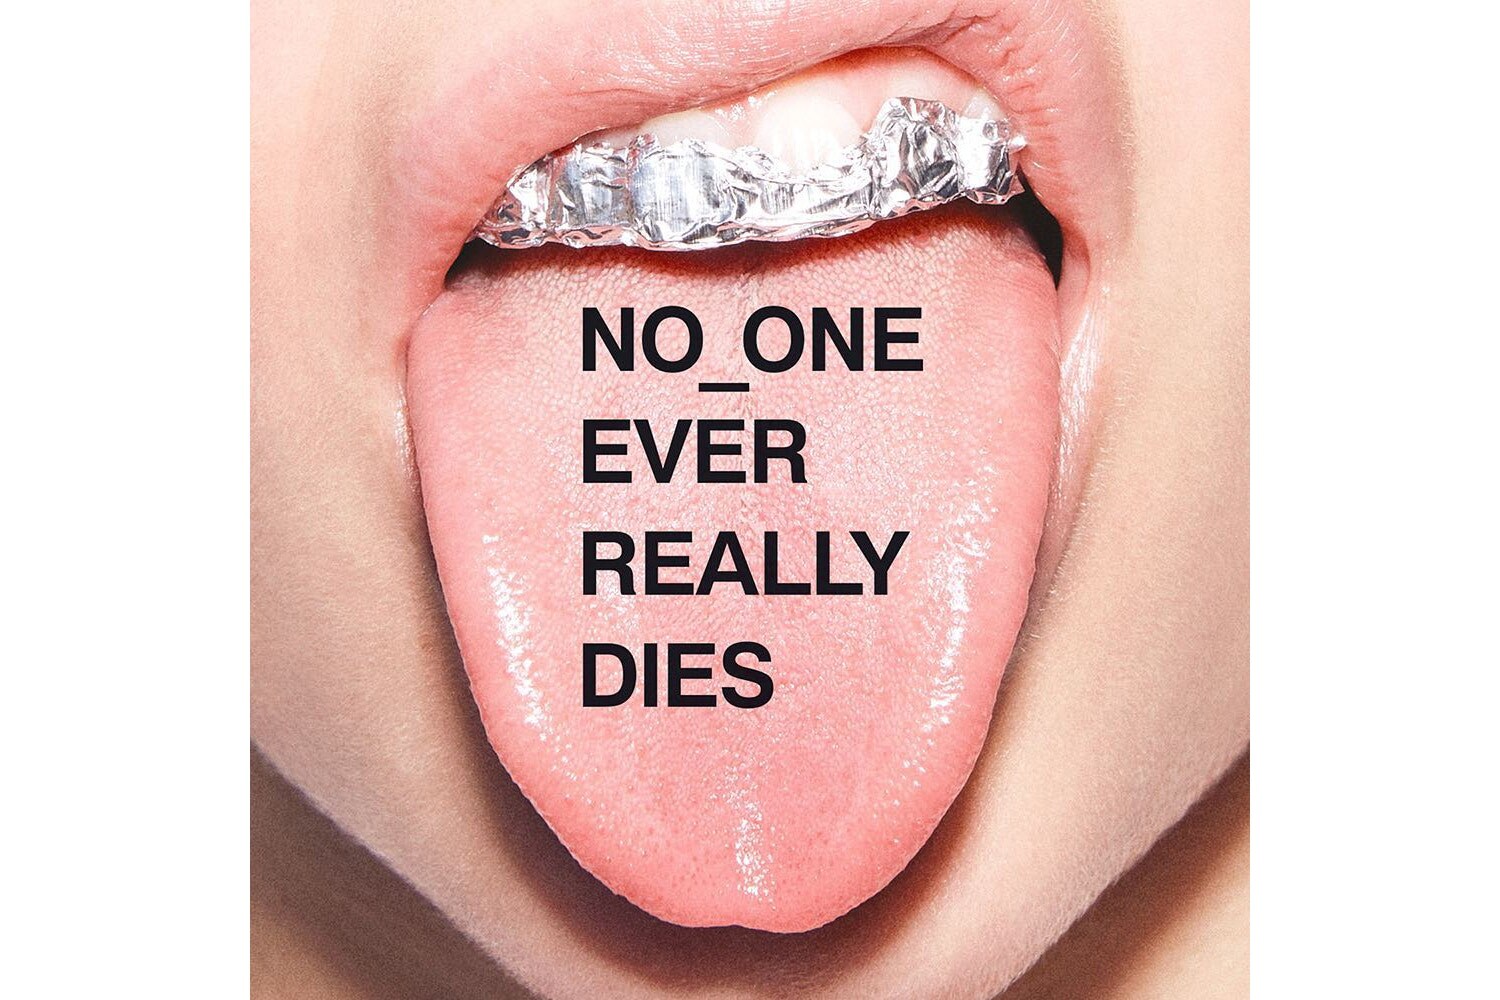 1. N*E*R*D - 'No-One Ever Really Dies'